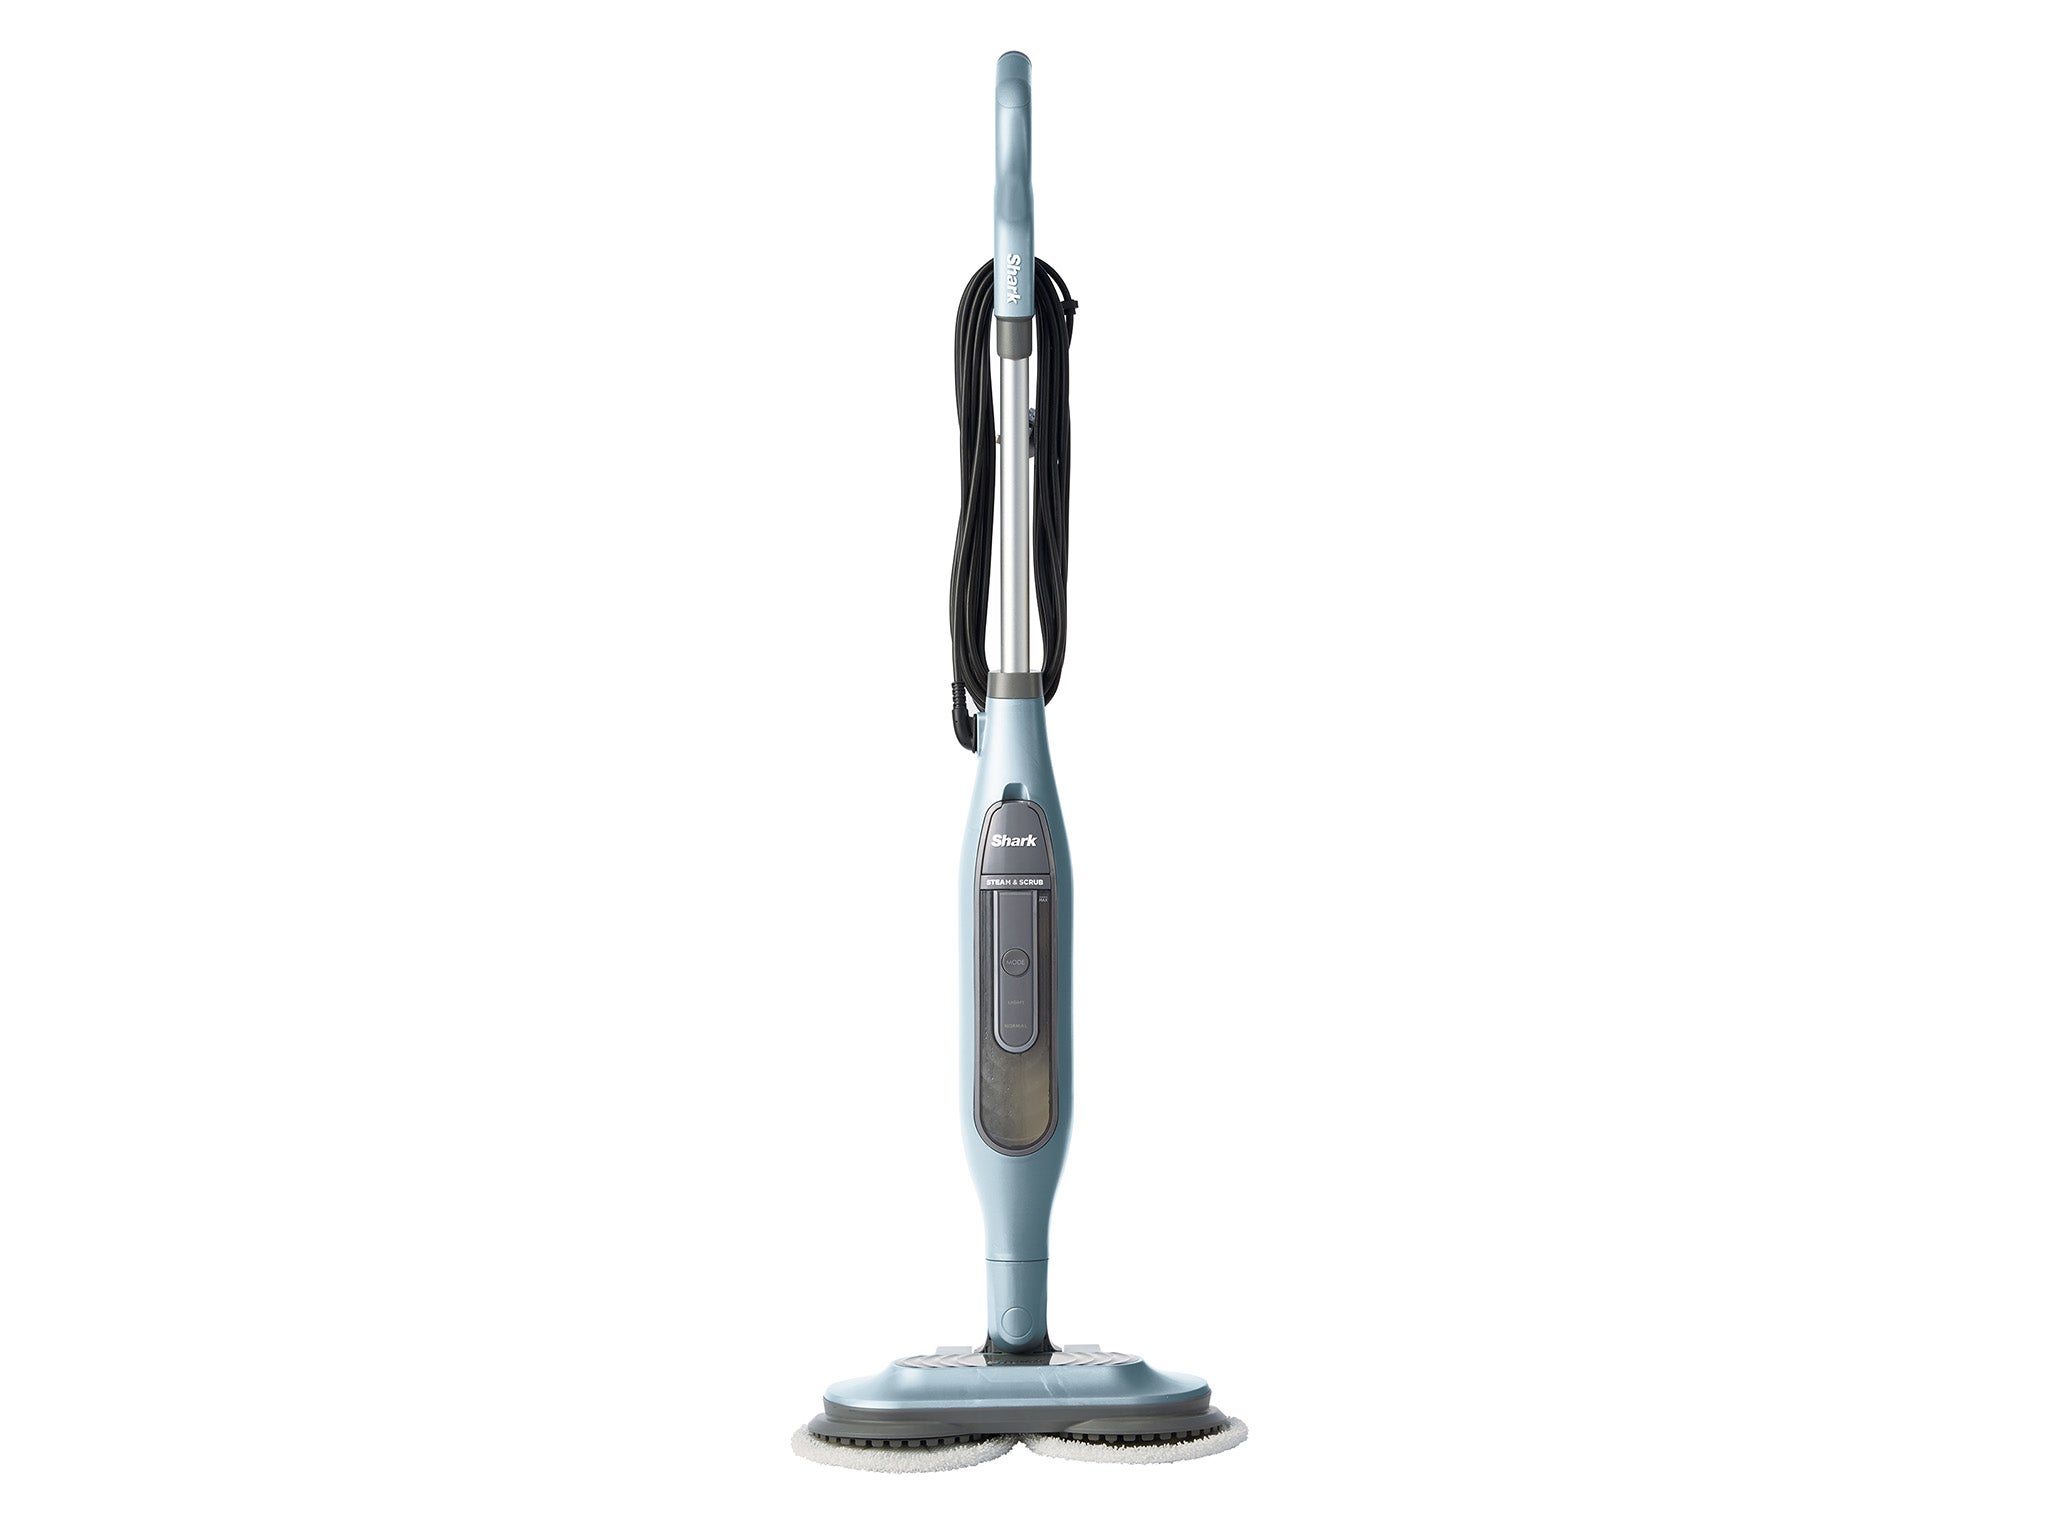 https://static.independent.co.uk/2023/02/16/11/Shark%20steam%20and%20scrub%20automatic%20steam%20mop%20S6002.jpg